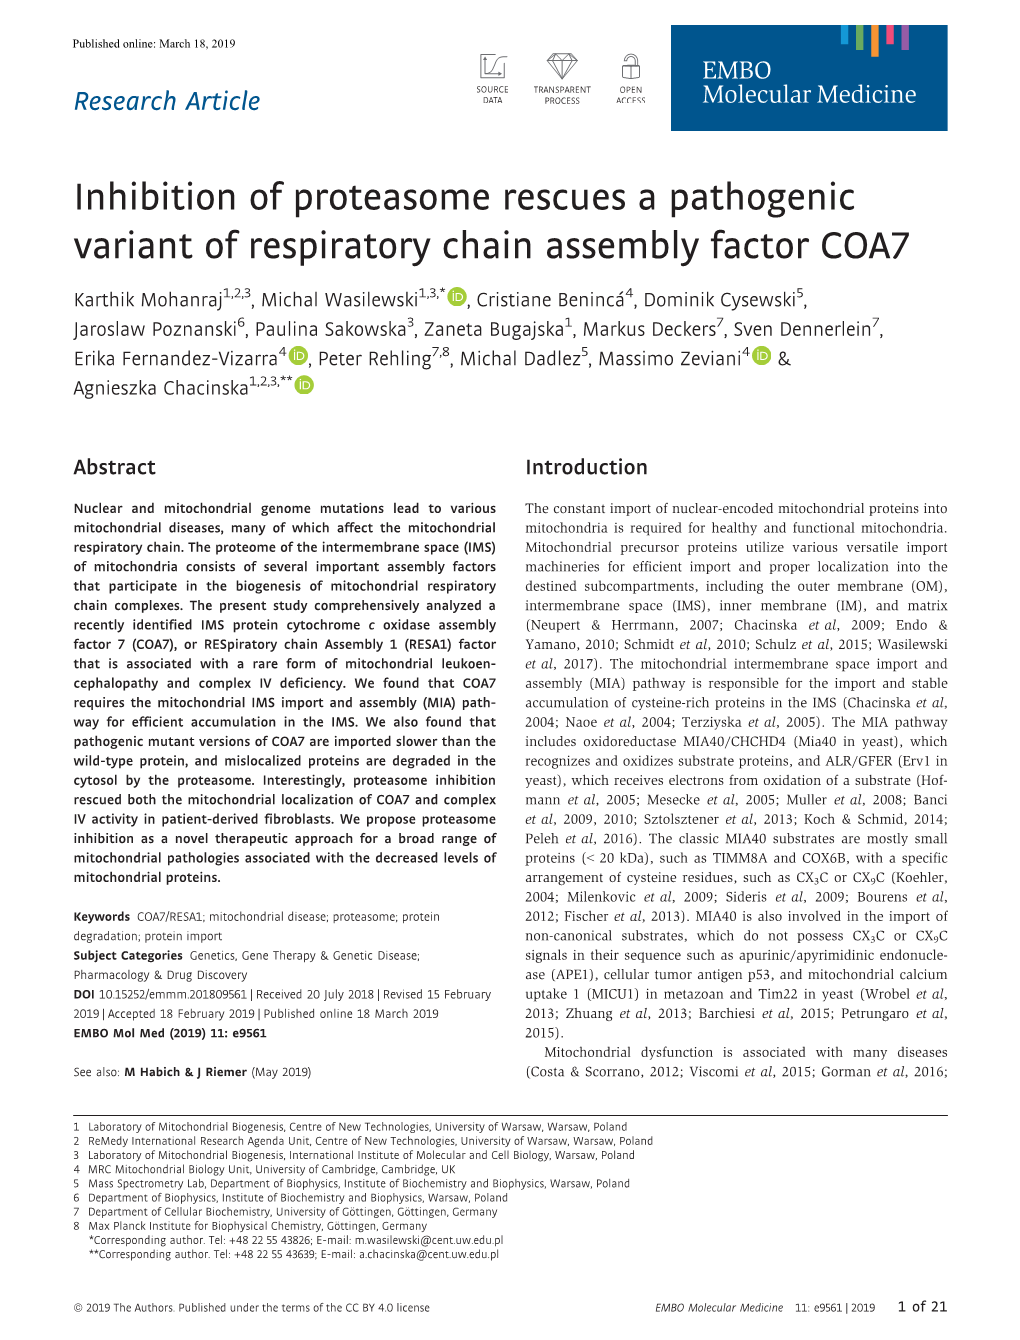 Inhibition of Proteasome Rescues a Pathogenic Variant of Respiratory Chain Assembly Factor COA7